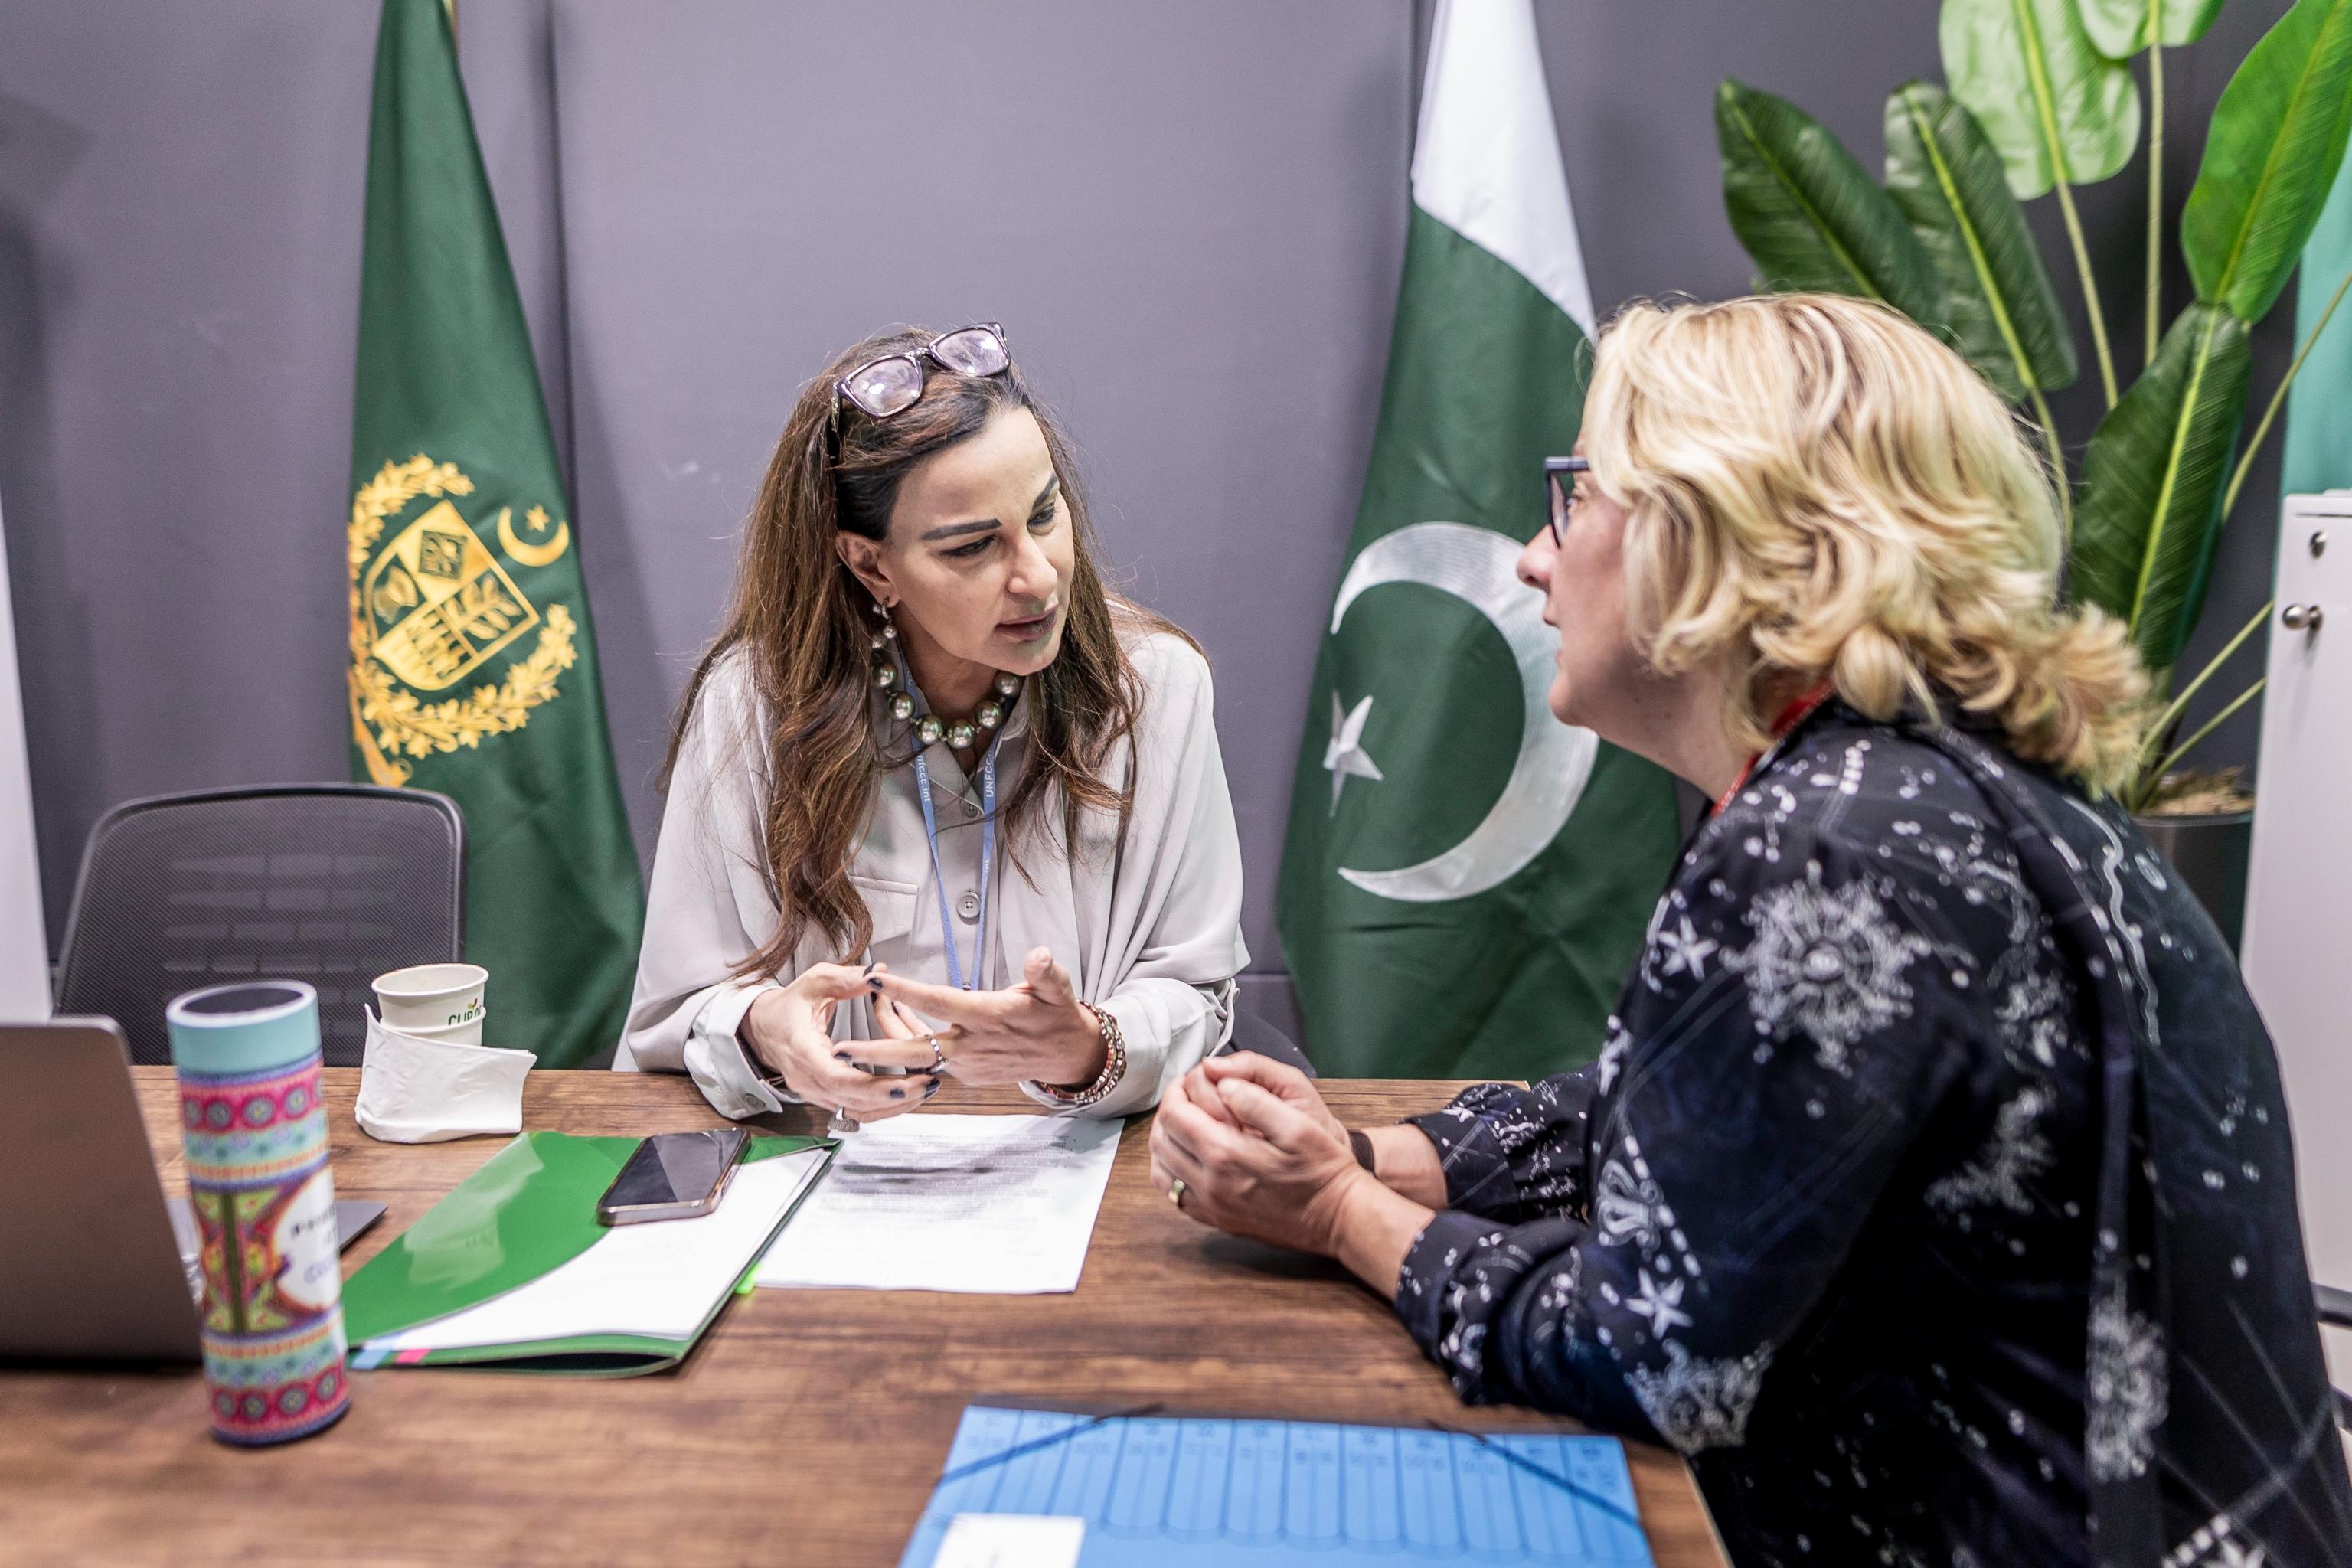 German Development Minister Svenja Schulze and Pakistan's Climate Change Minister Sherry Rehman at a joint event at the climate conference in Sharm el-Sheikh